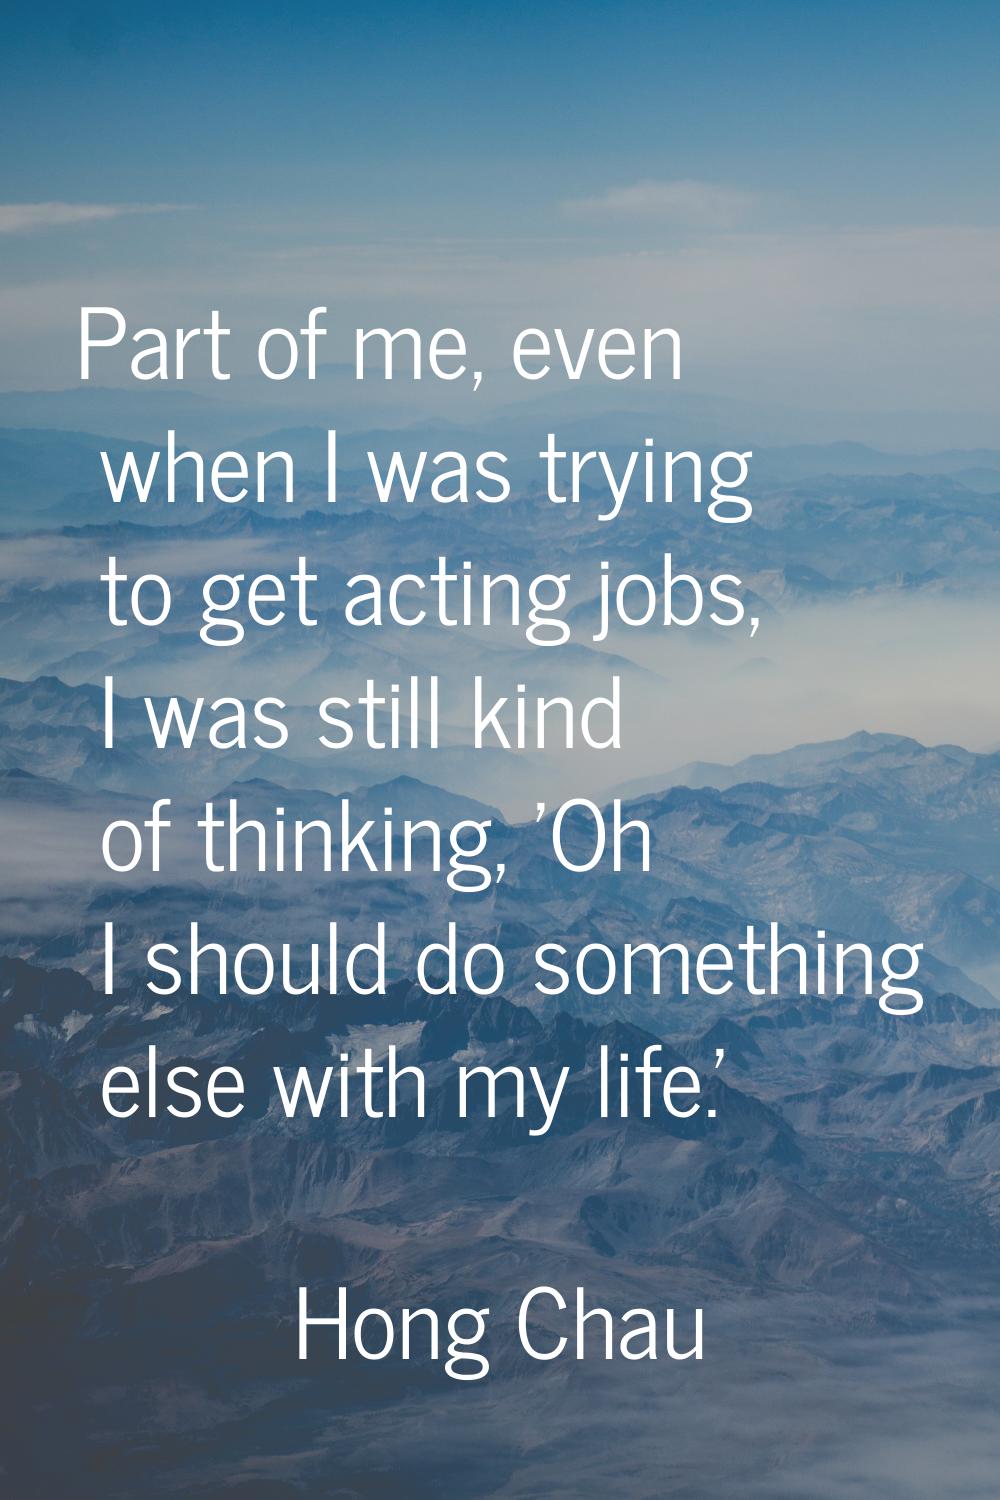 Part of me, even when I was trying to get acting jobs, I was still kind of thinking, 'Oh I should d